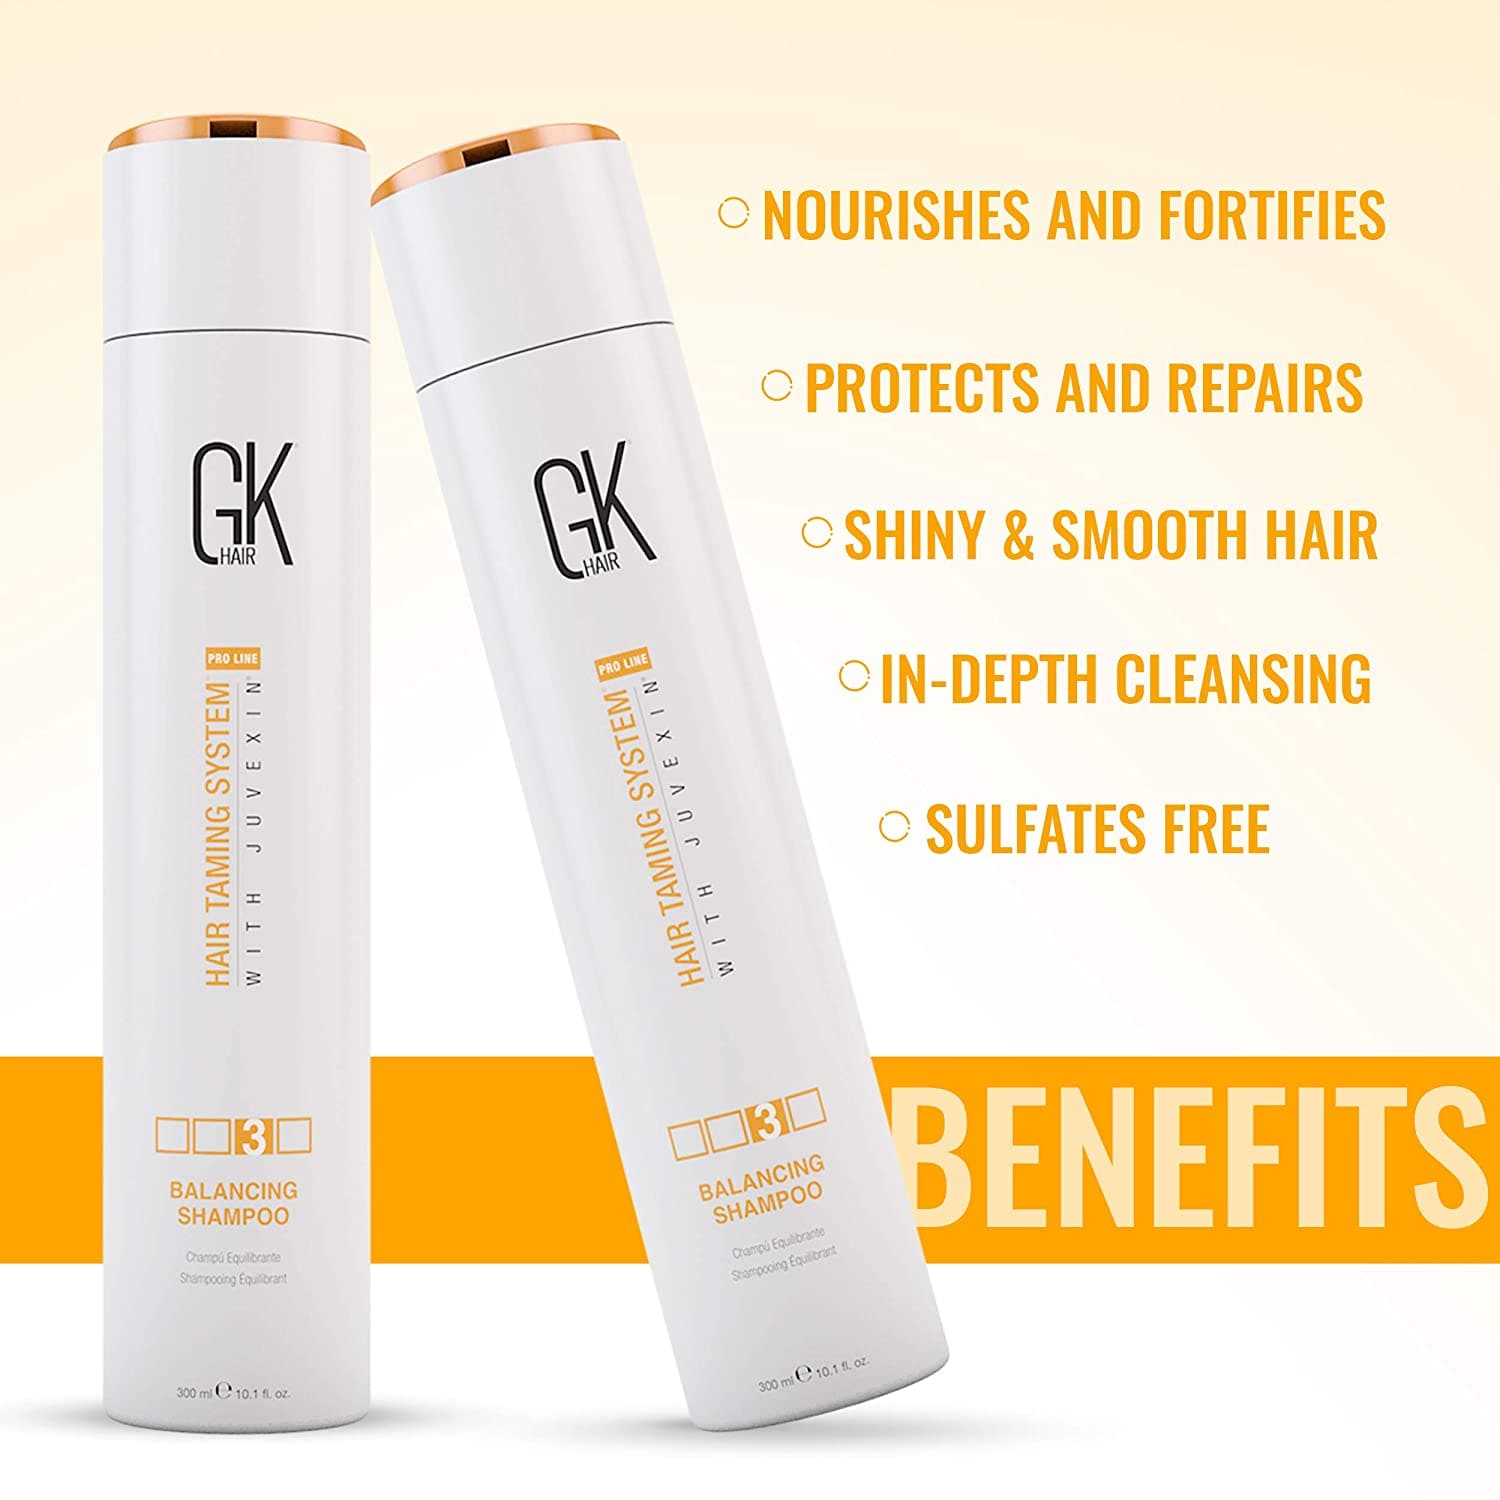 GK HAIR Global Keratin Balancing Shampoo 300 ml For Dry Damaged Oily Greasy & Color Treated Hair, Restores pH Levels, Sulfate-Paraben Free Daily Conditioning Deep Cleanser & Impurities Remover - Instachiq